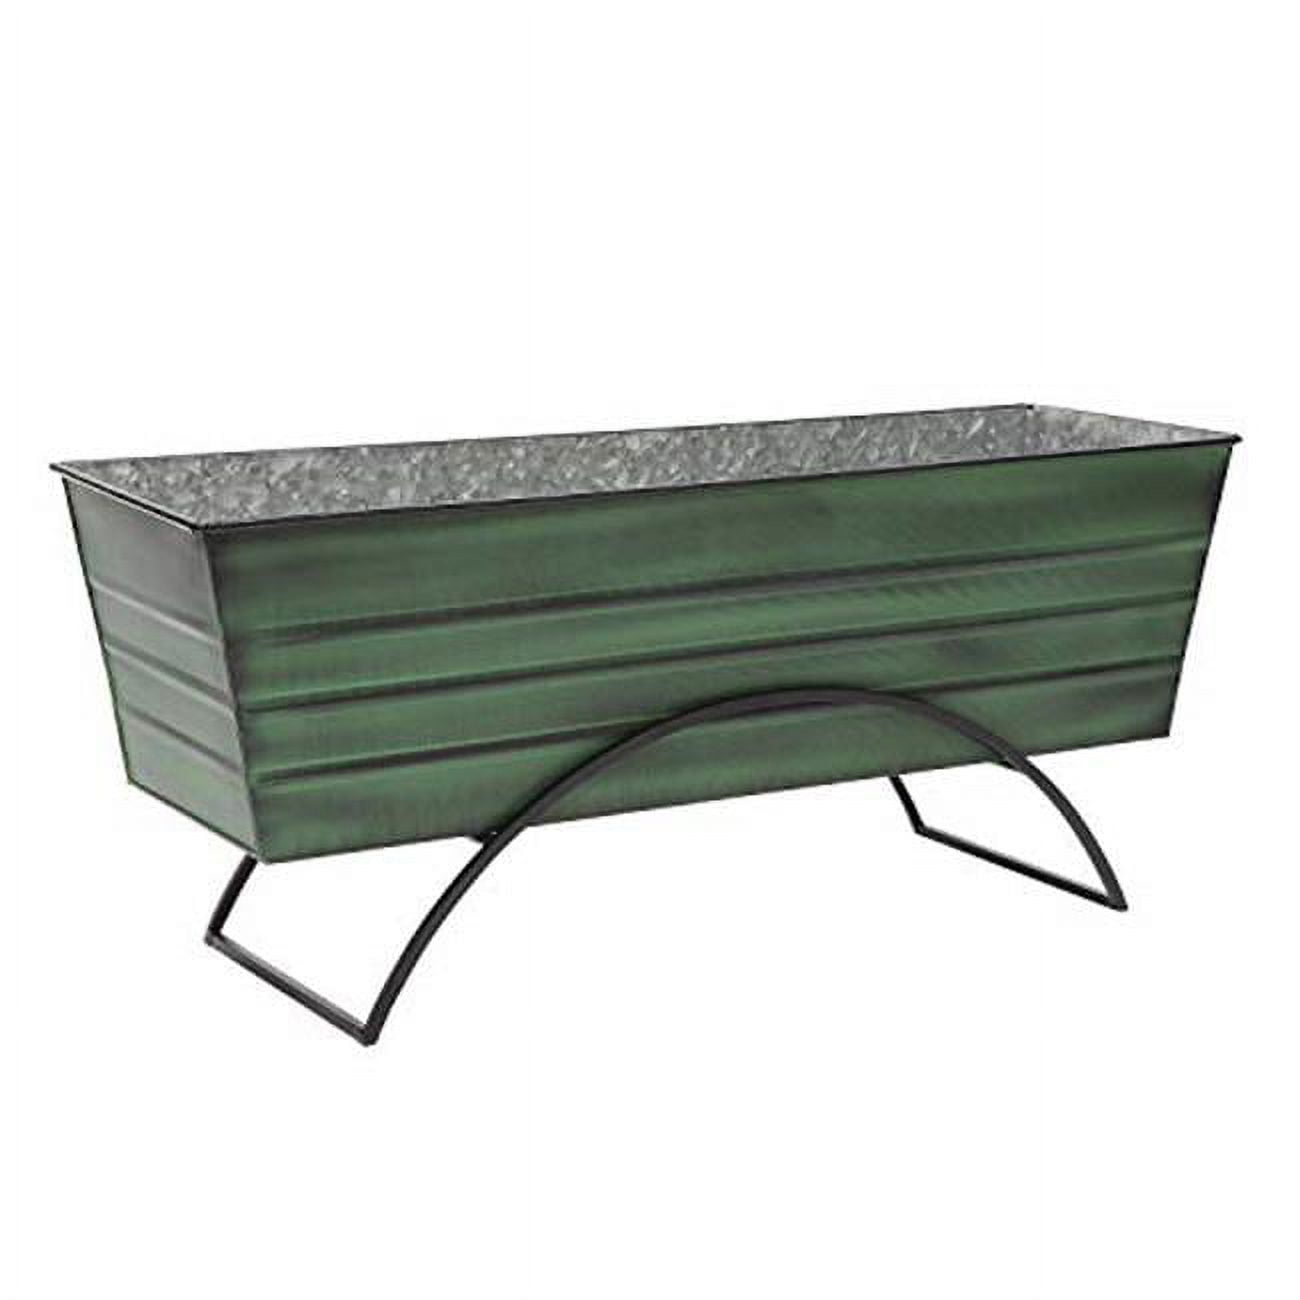 Achla Vfb-06-s Odette Stand With Flower Box, Green - Large